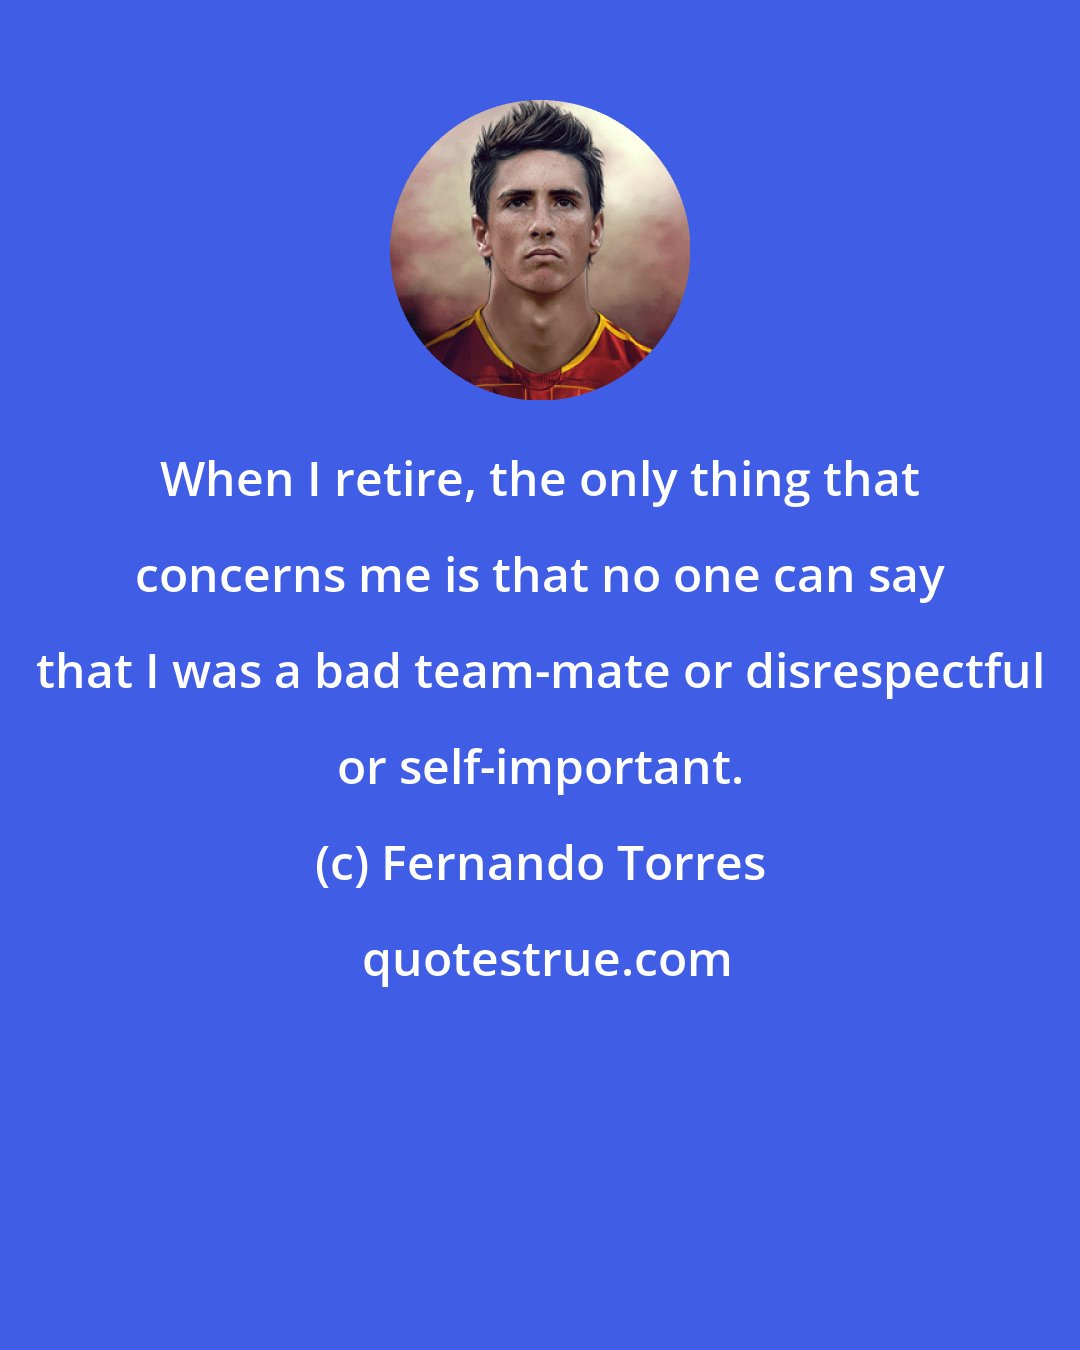 Fernando Torres: When I retire, the only thing that concerns me is that no one can say that I was a bad team-mate or disrespectful or self-important.